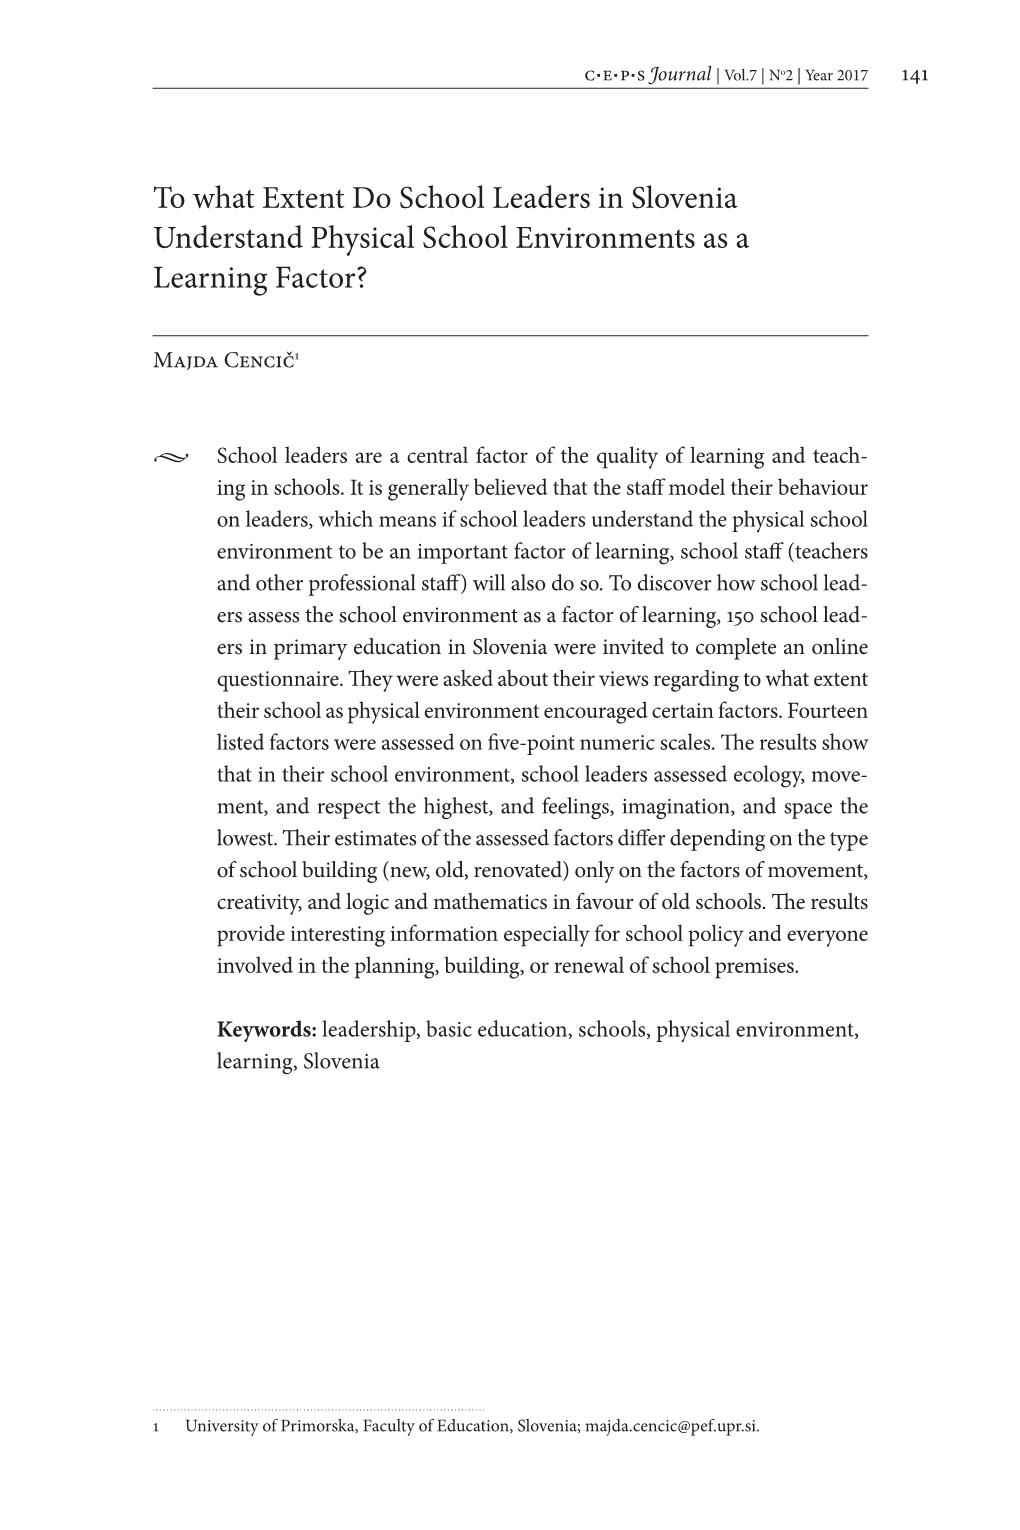 To What Extent Do School Leaders in Slovenia Understand Physical School Environments As a Learning Factor?